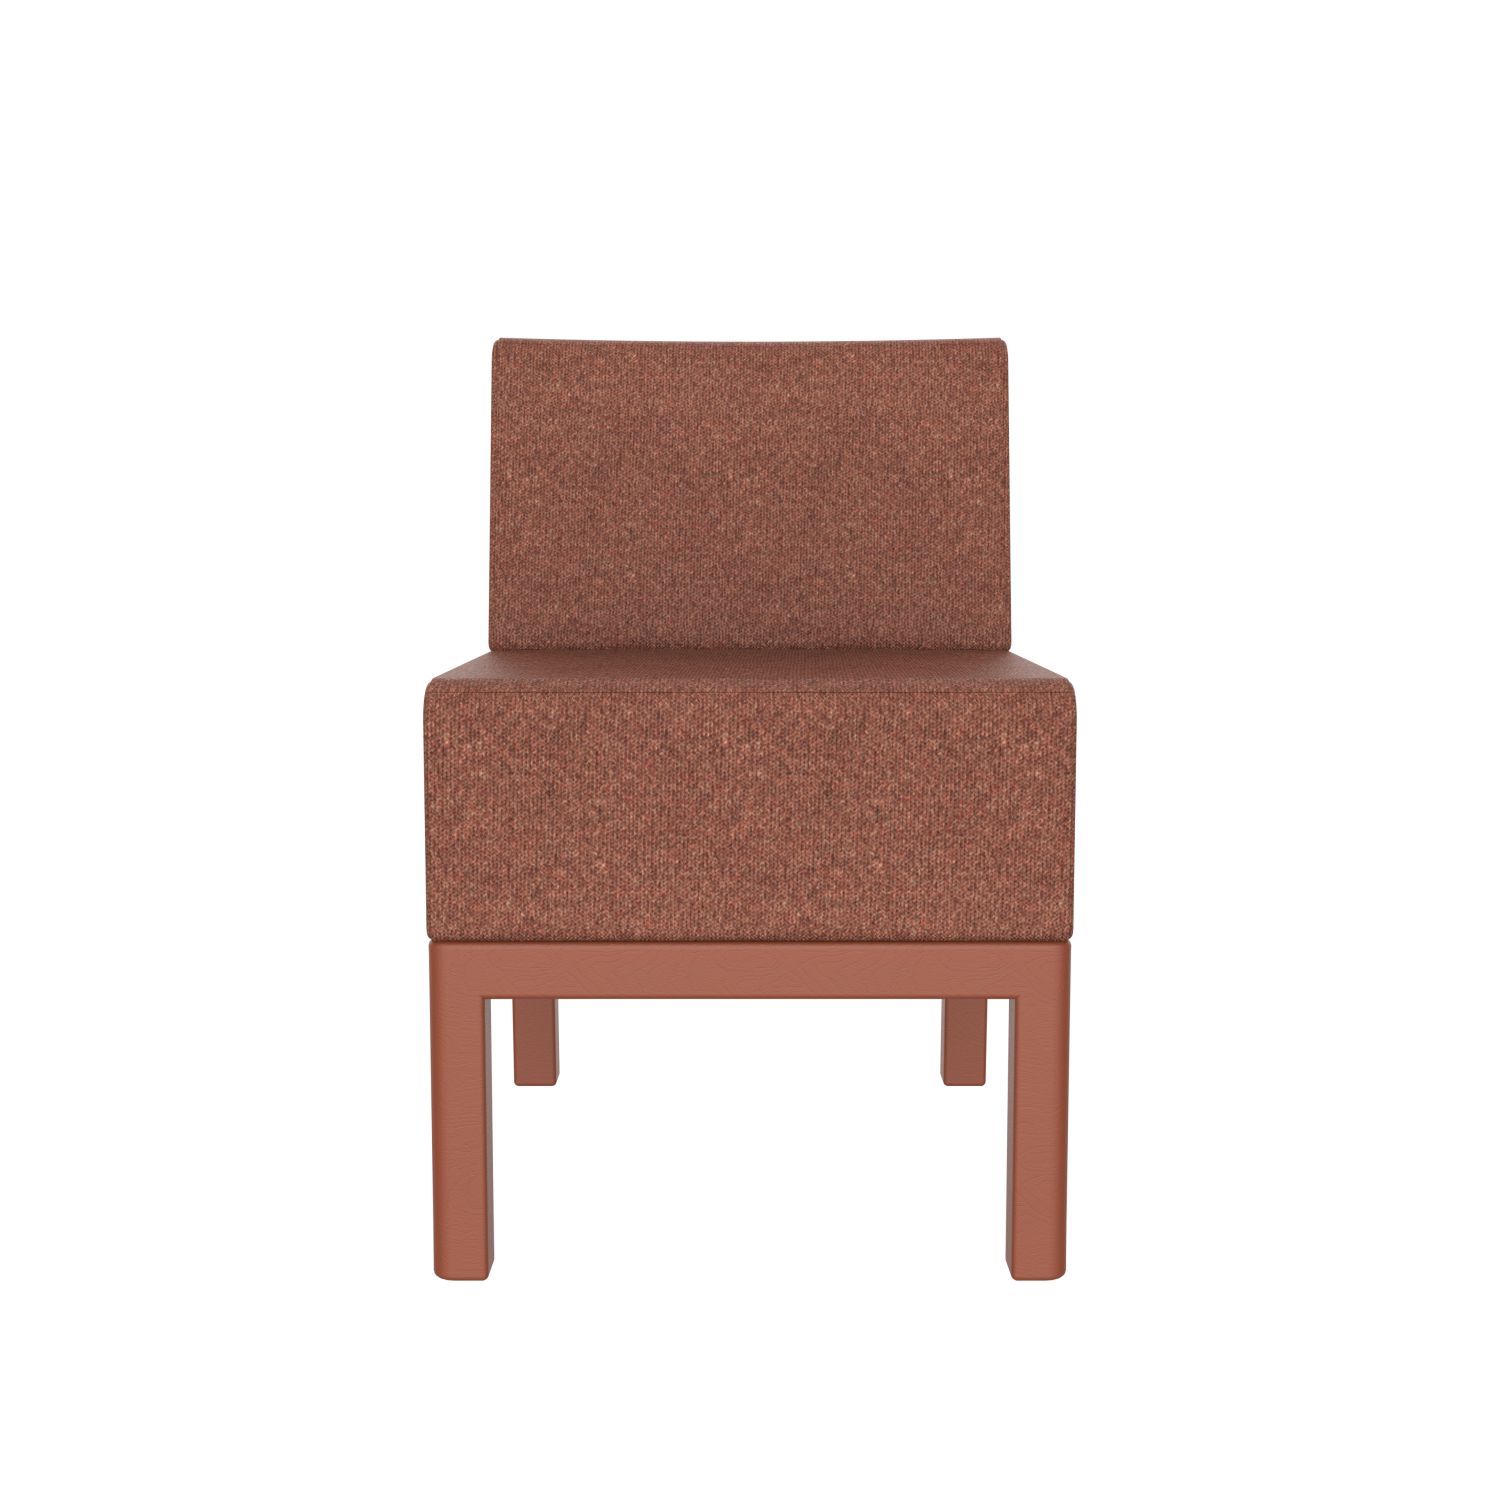 lensvelt piet boon chair 01 without armrests moss clay brown 65 price level 2 copper brown ral8004 hard leg ends